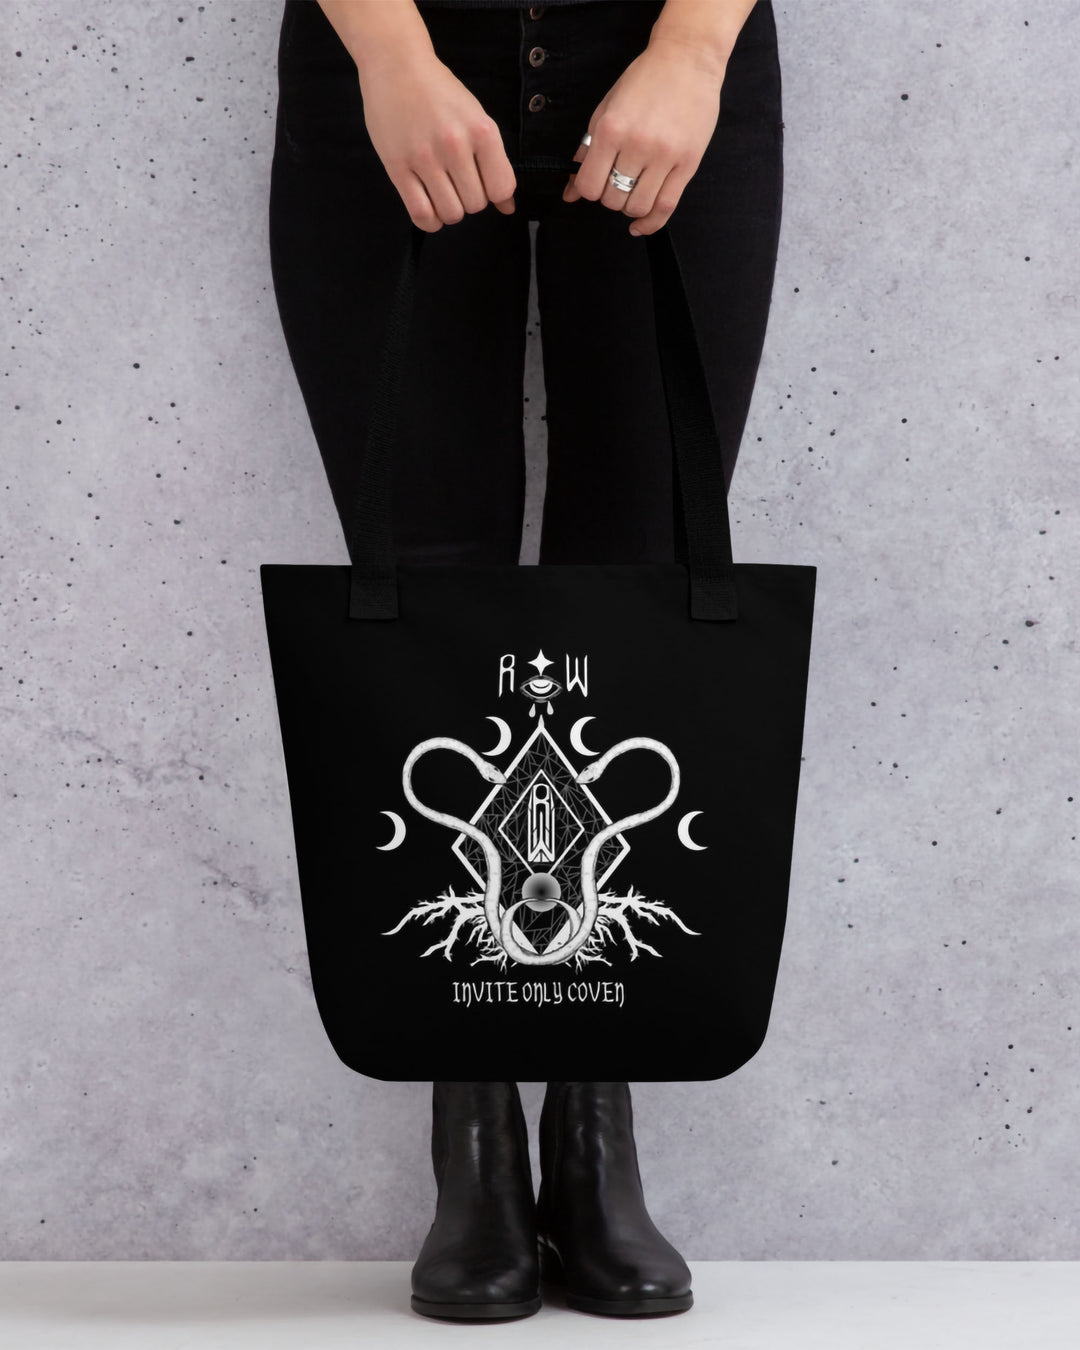 Witchy Coven Tote Bag - Vegan Gothic Fashion - Ethical Alt-Style Accessory - Dark Academia Aesthetic - On Demand Eco-friendly Sustainable Product